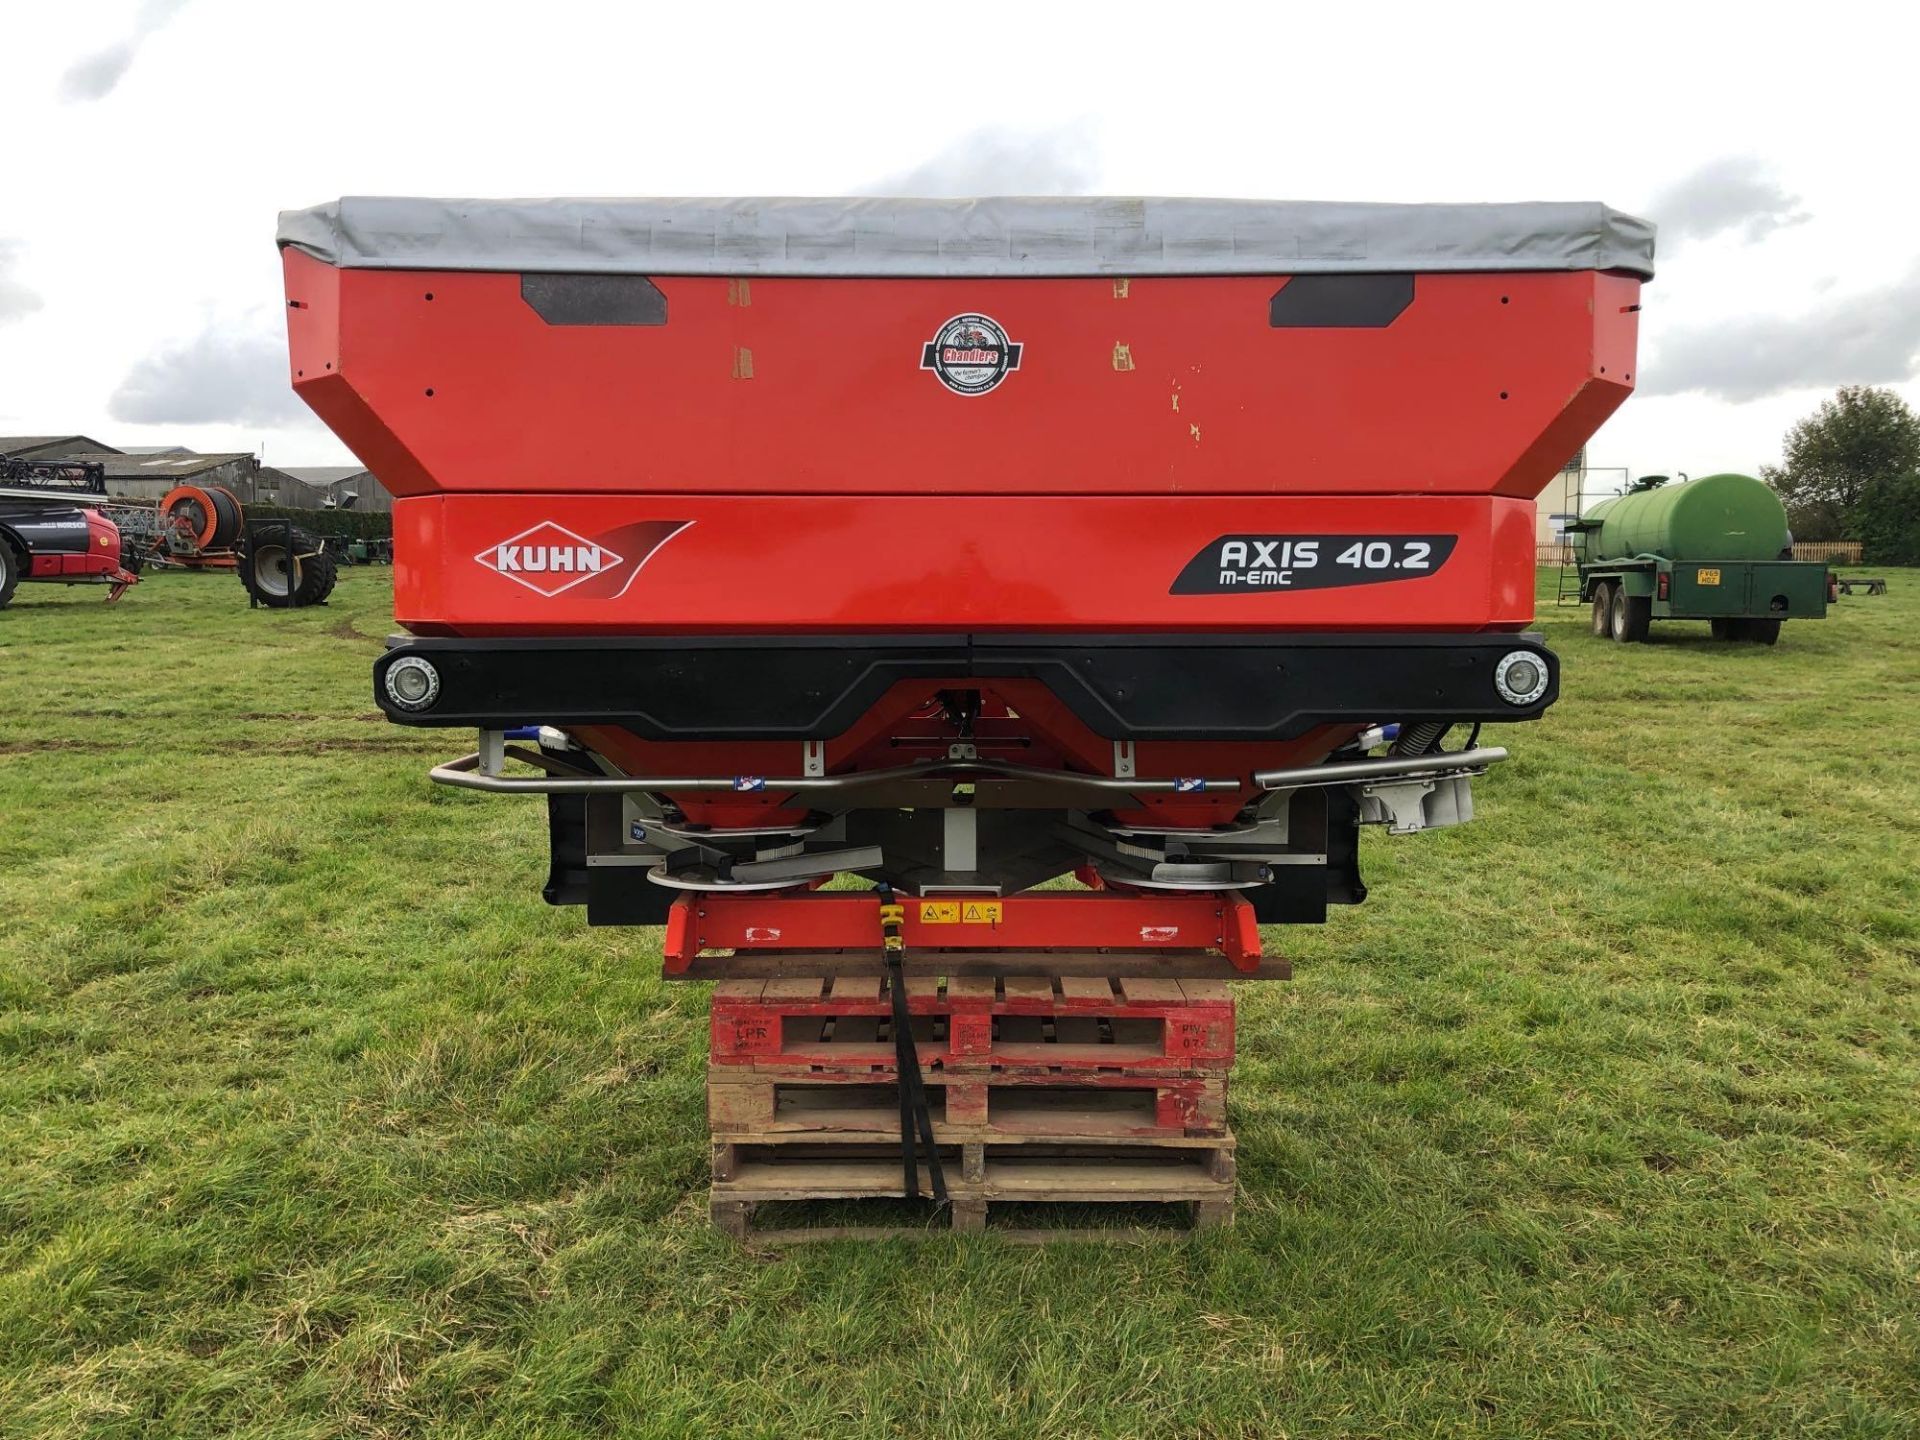 2016 Kuhn Axis-M 40.2 EMC 36m twin disc fertiliser spreader with border control. Serial No: 09-04626 - Image 11 of 13